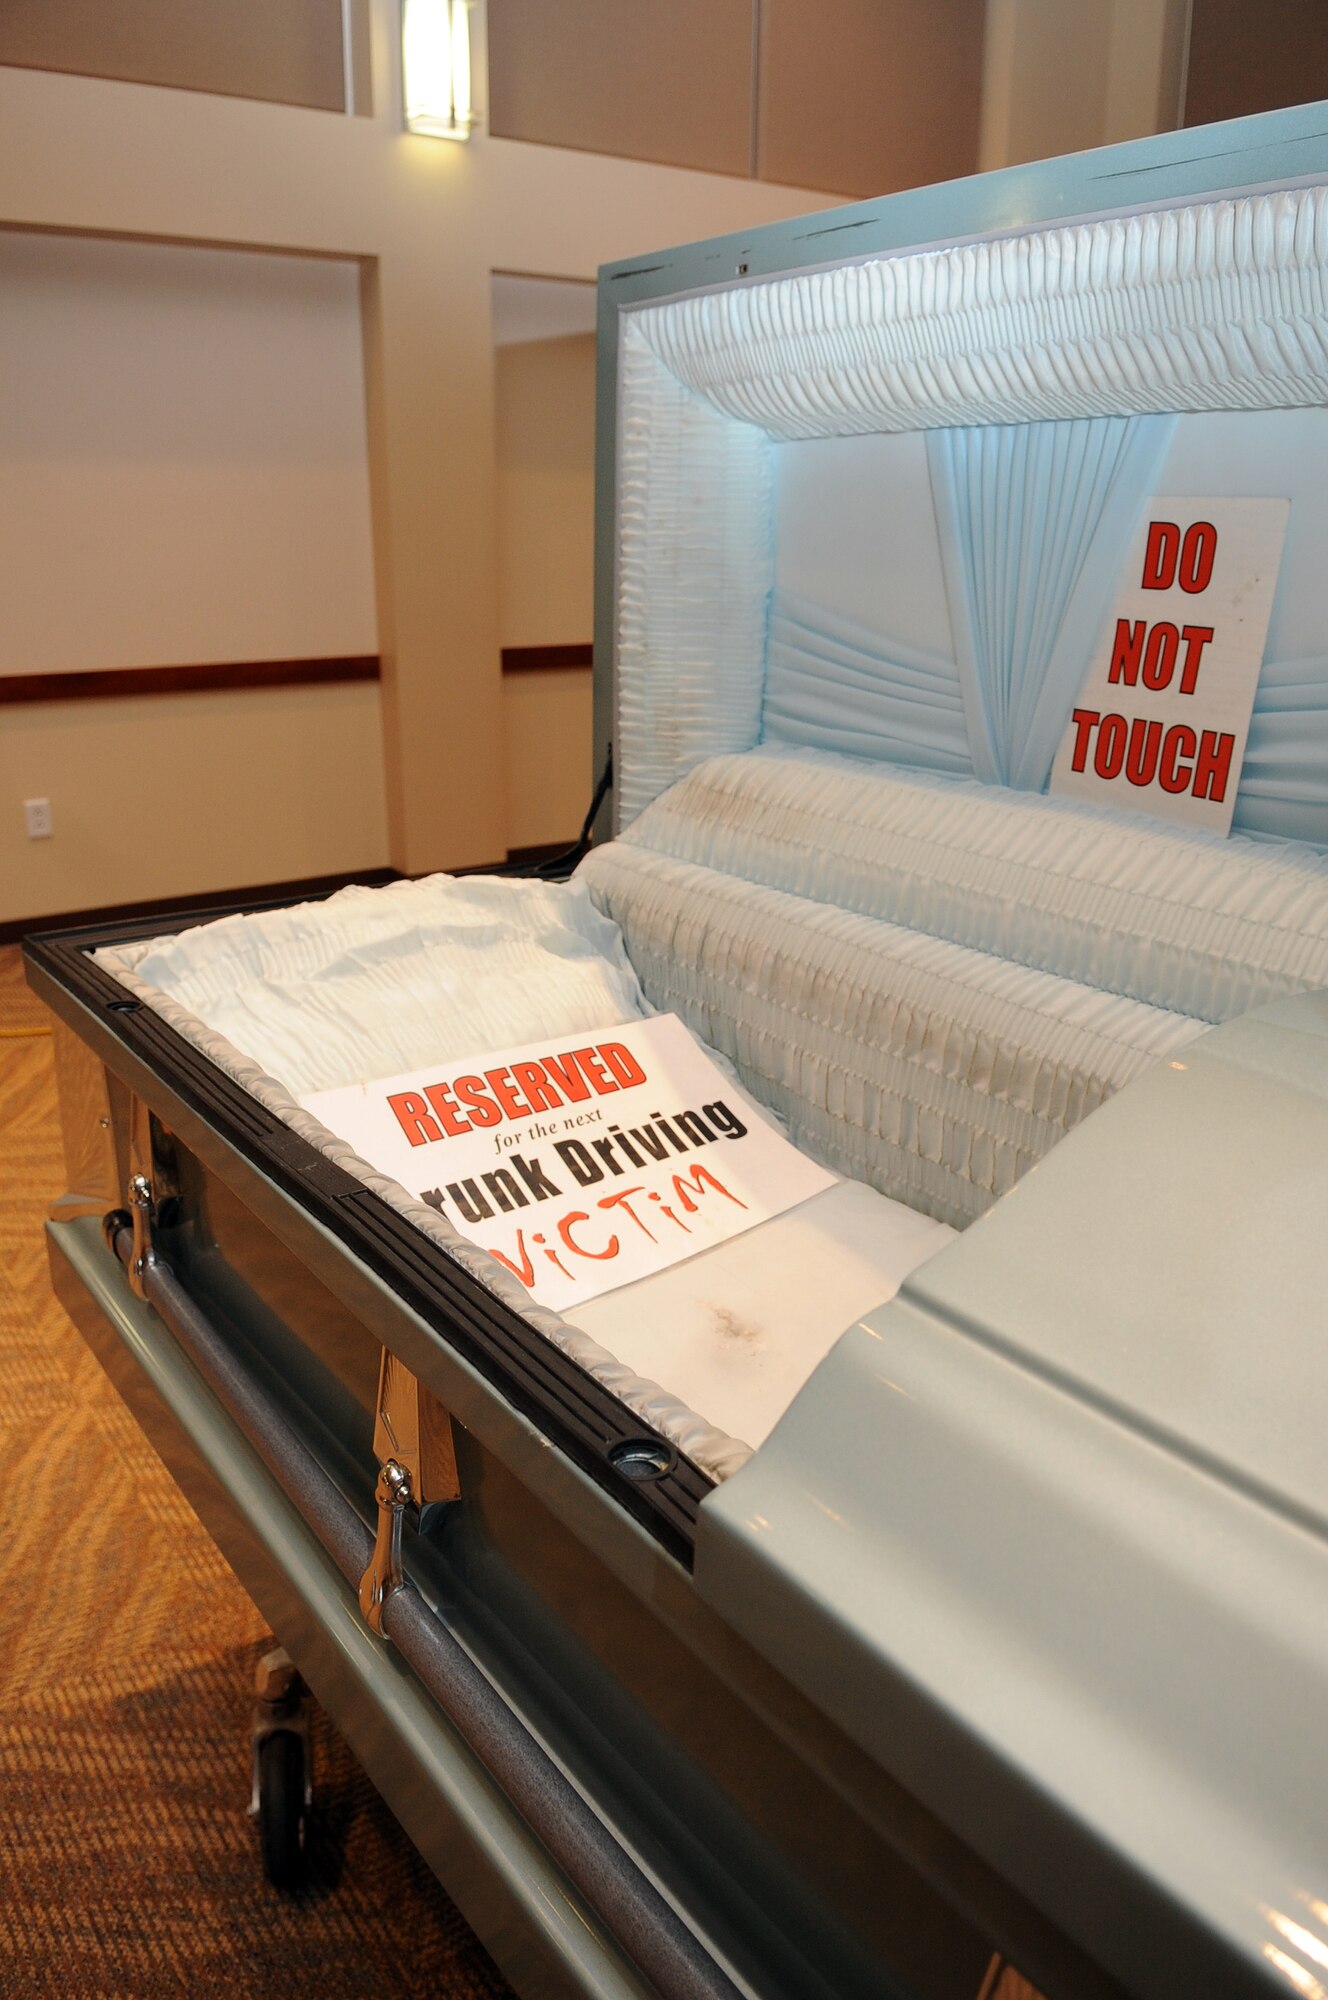 BUCKLEY AIR FORCE BASE, Colo. -- A coffin displays a reserved sign for the next drunk driving victim during the Safe-a-Life Tour May 20 at the Leadership Development Center. ( U.S. Air Force Photo by Airman 1st Class Marcy Glass )
